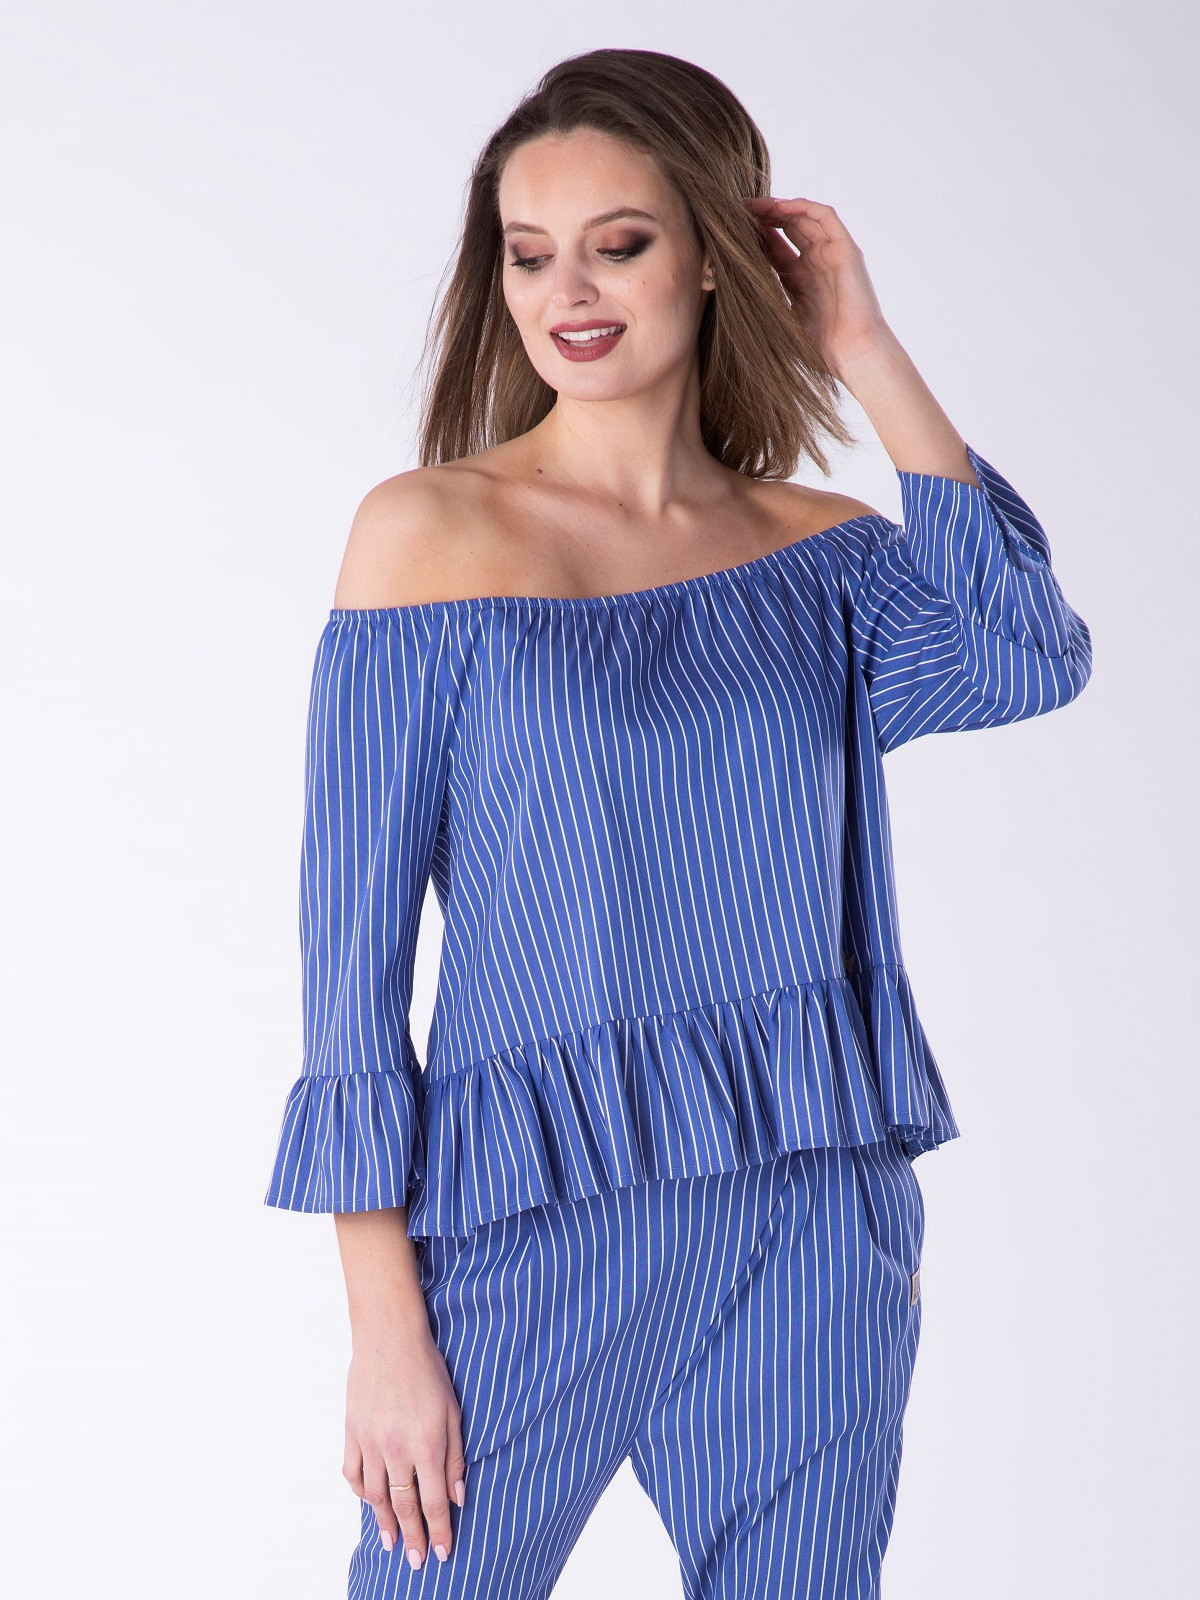 Halenka Look Made With Love 803 Frill Blue/White L/XL